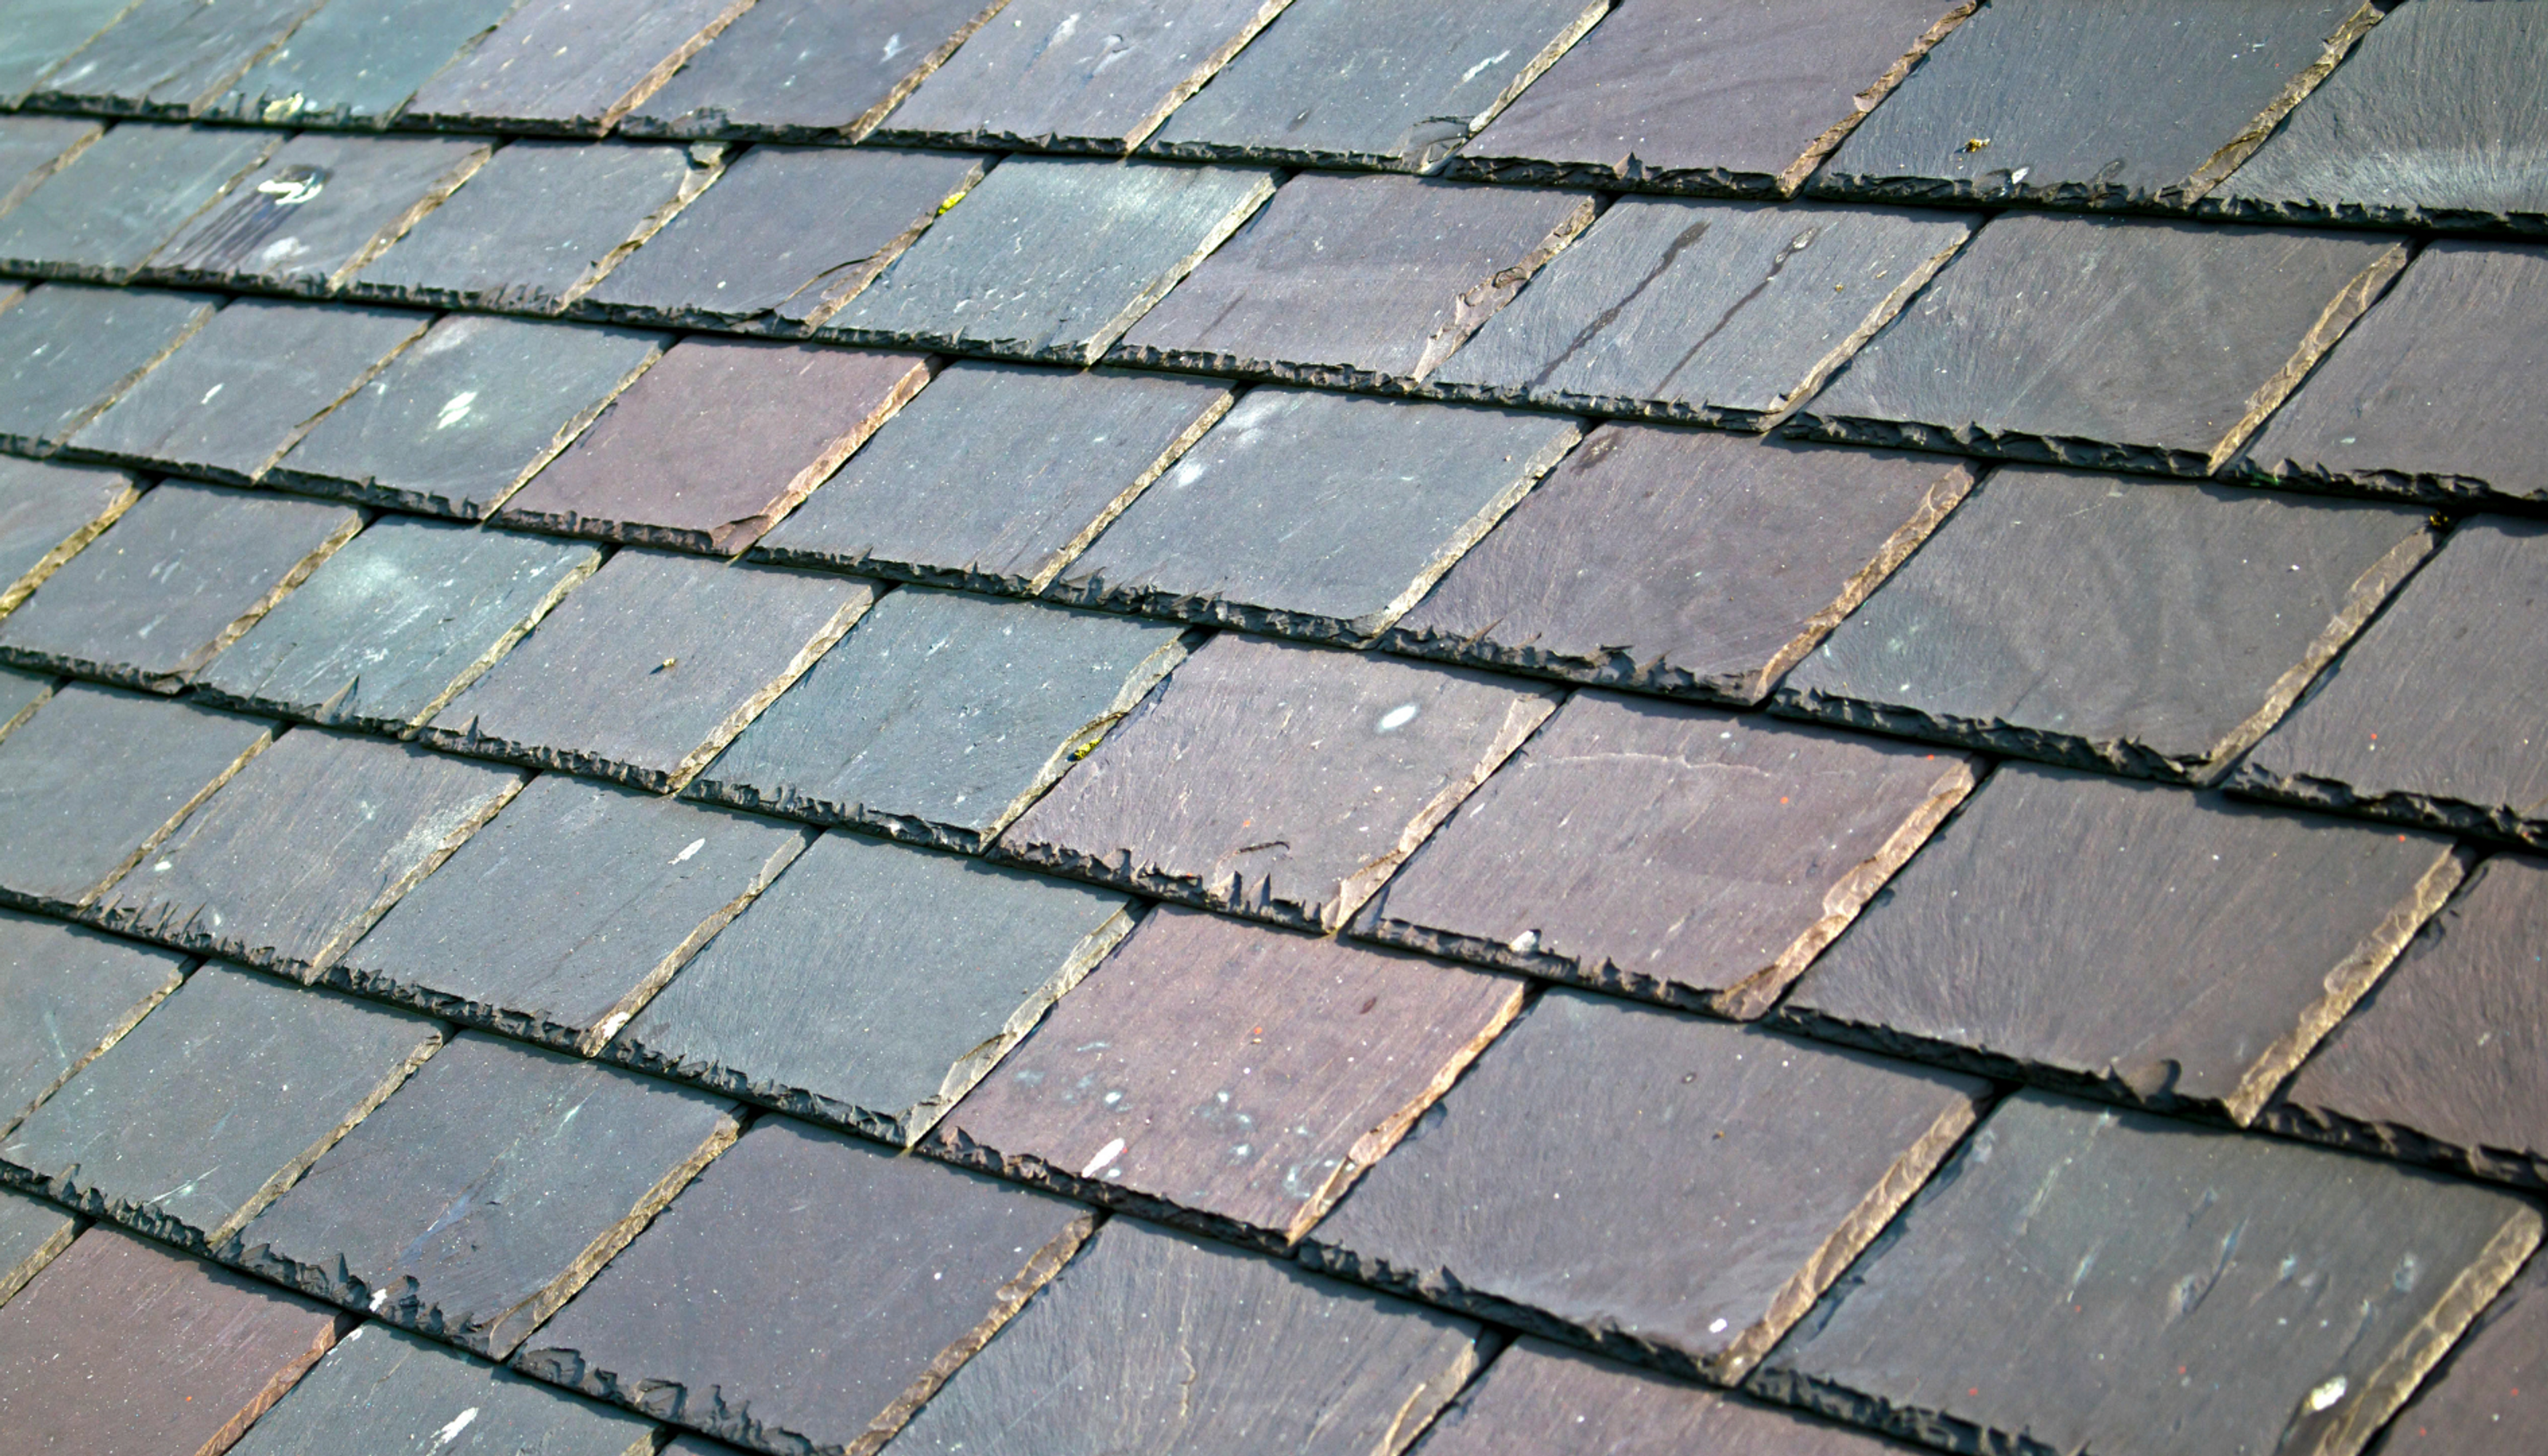 "Close-up of stone slate roof showcasing durable roofing material."